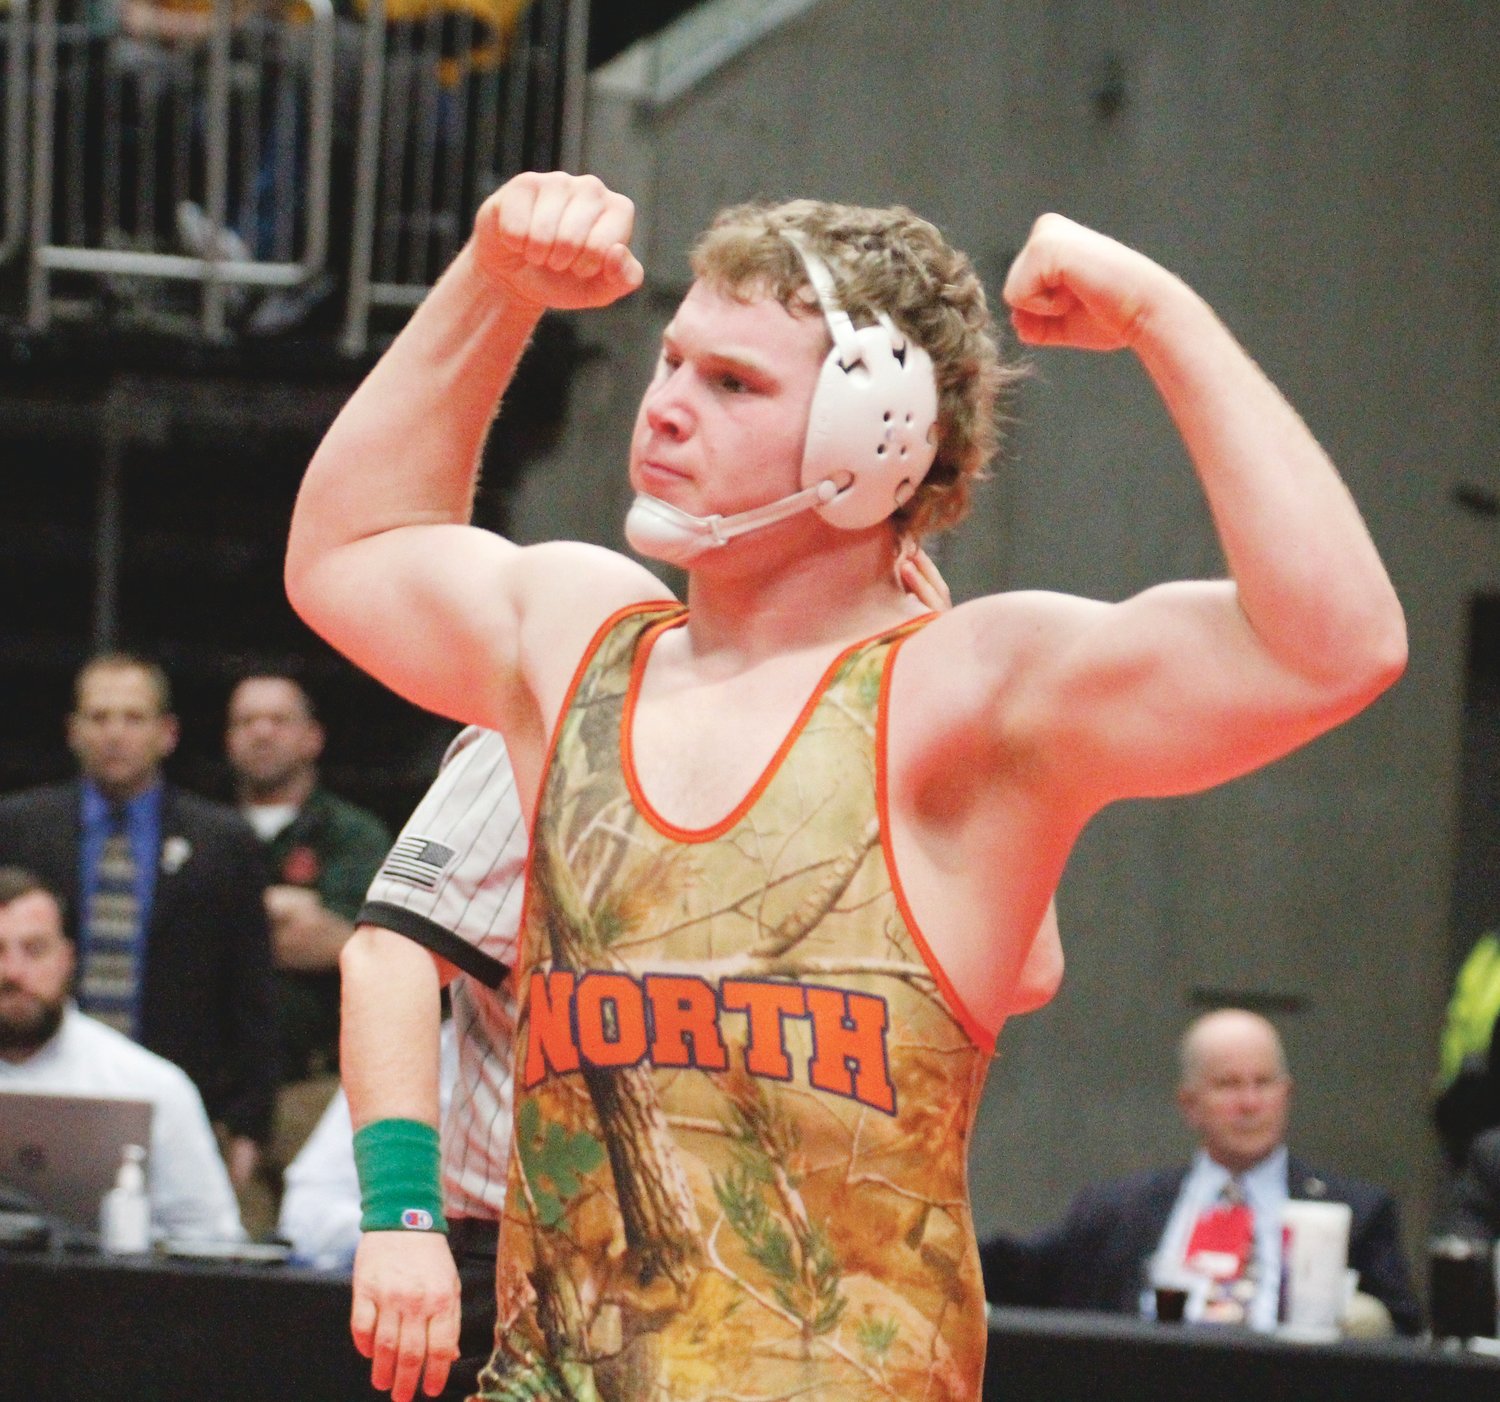 North Montgomery's Drew Webster flexes after winning his first round match at the state finals.